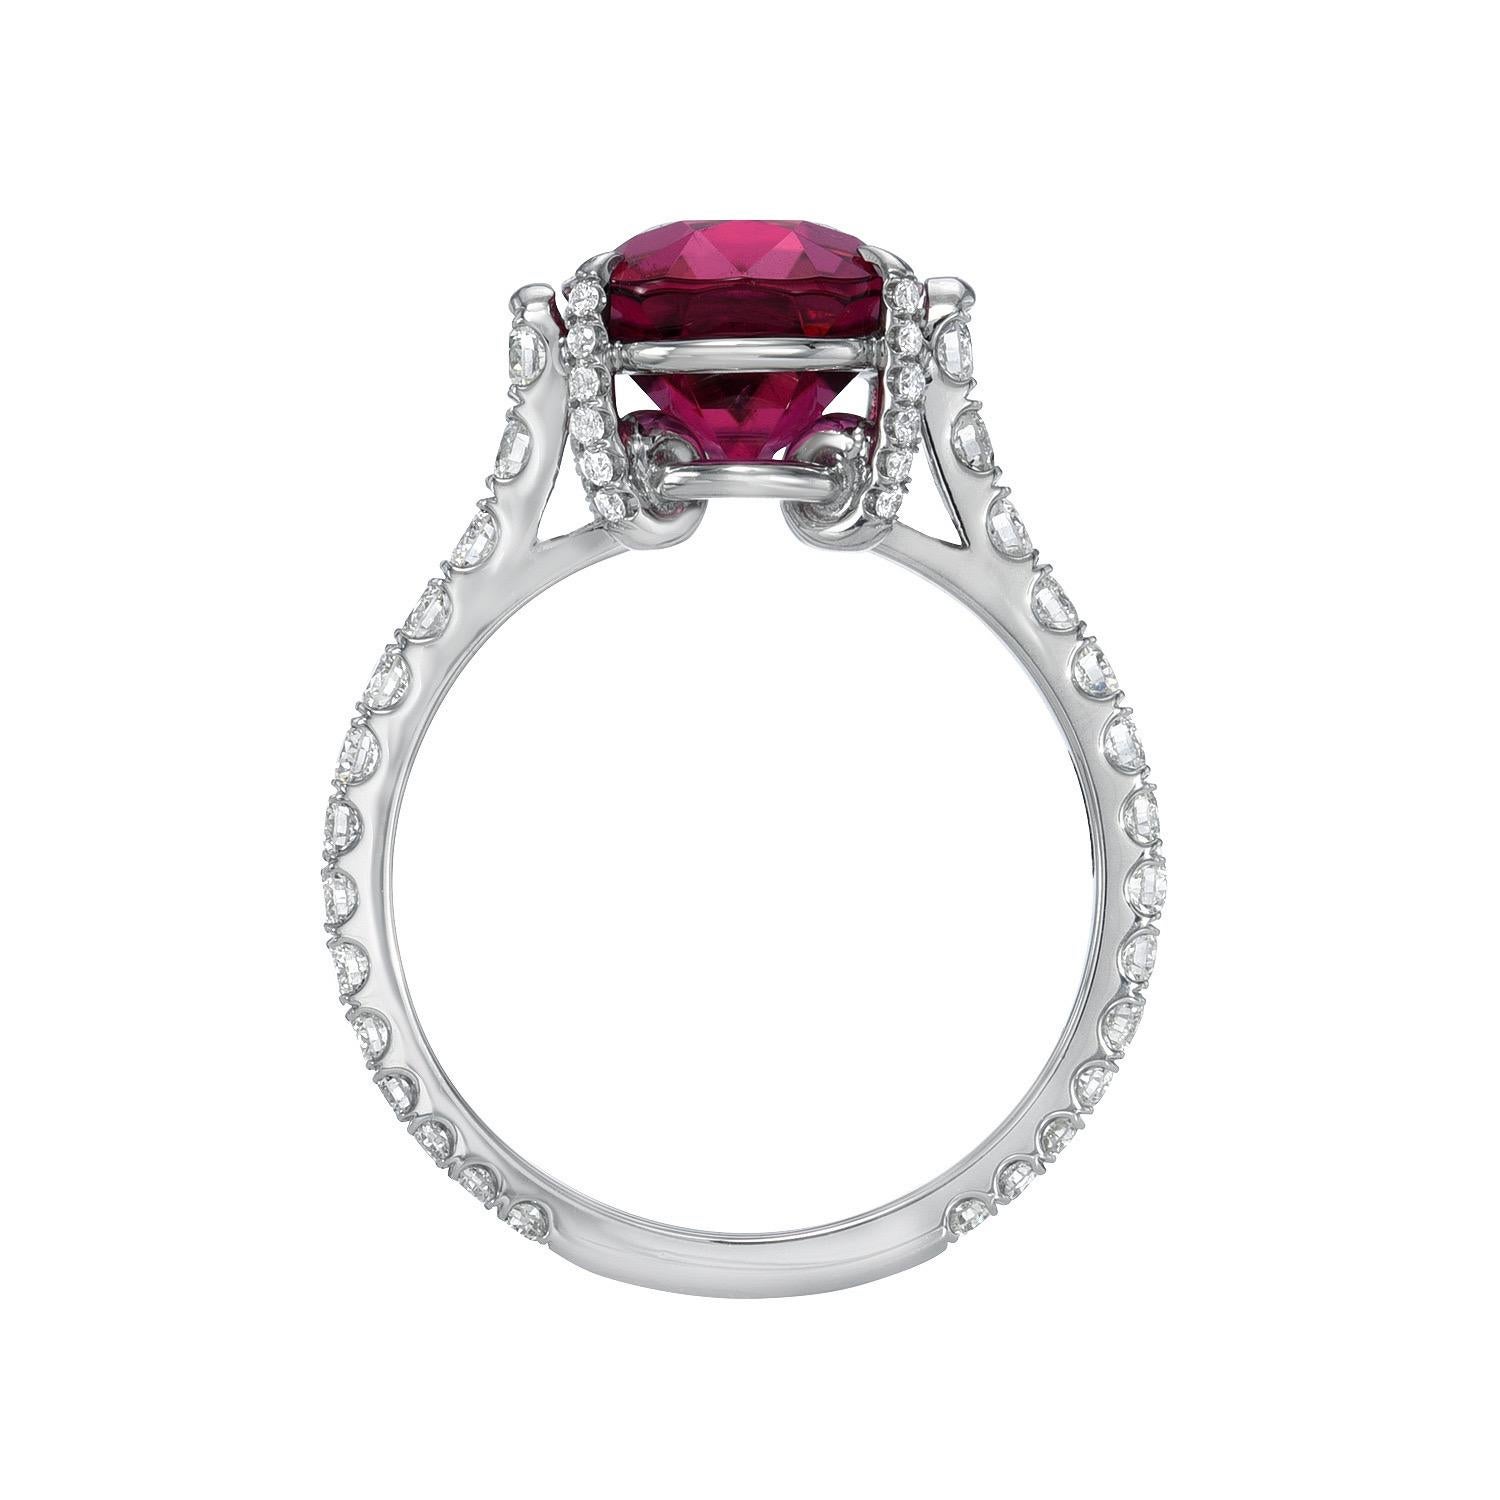 Contemporary Rubellite Tourmaline Ring 3.92 Carat Oval For Sale